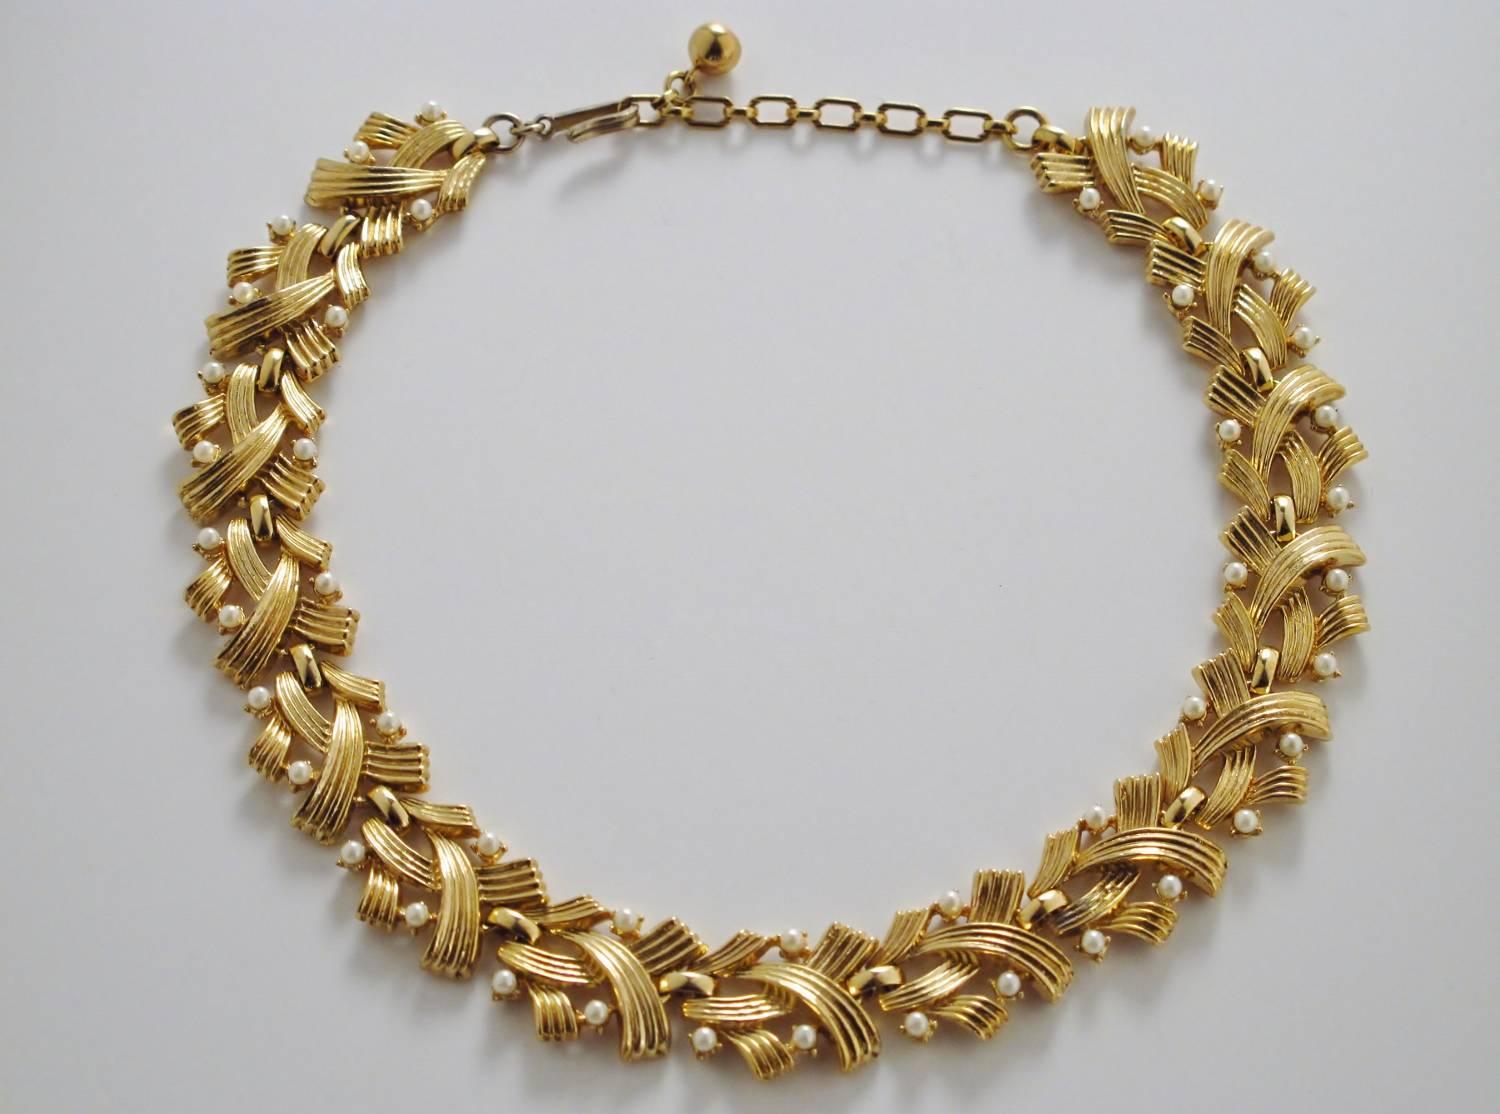 Trifari vintage pearl on gold tone necklace circa 1950s, USA. Vintage faux pearls set in gold tone. 15